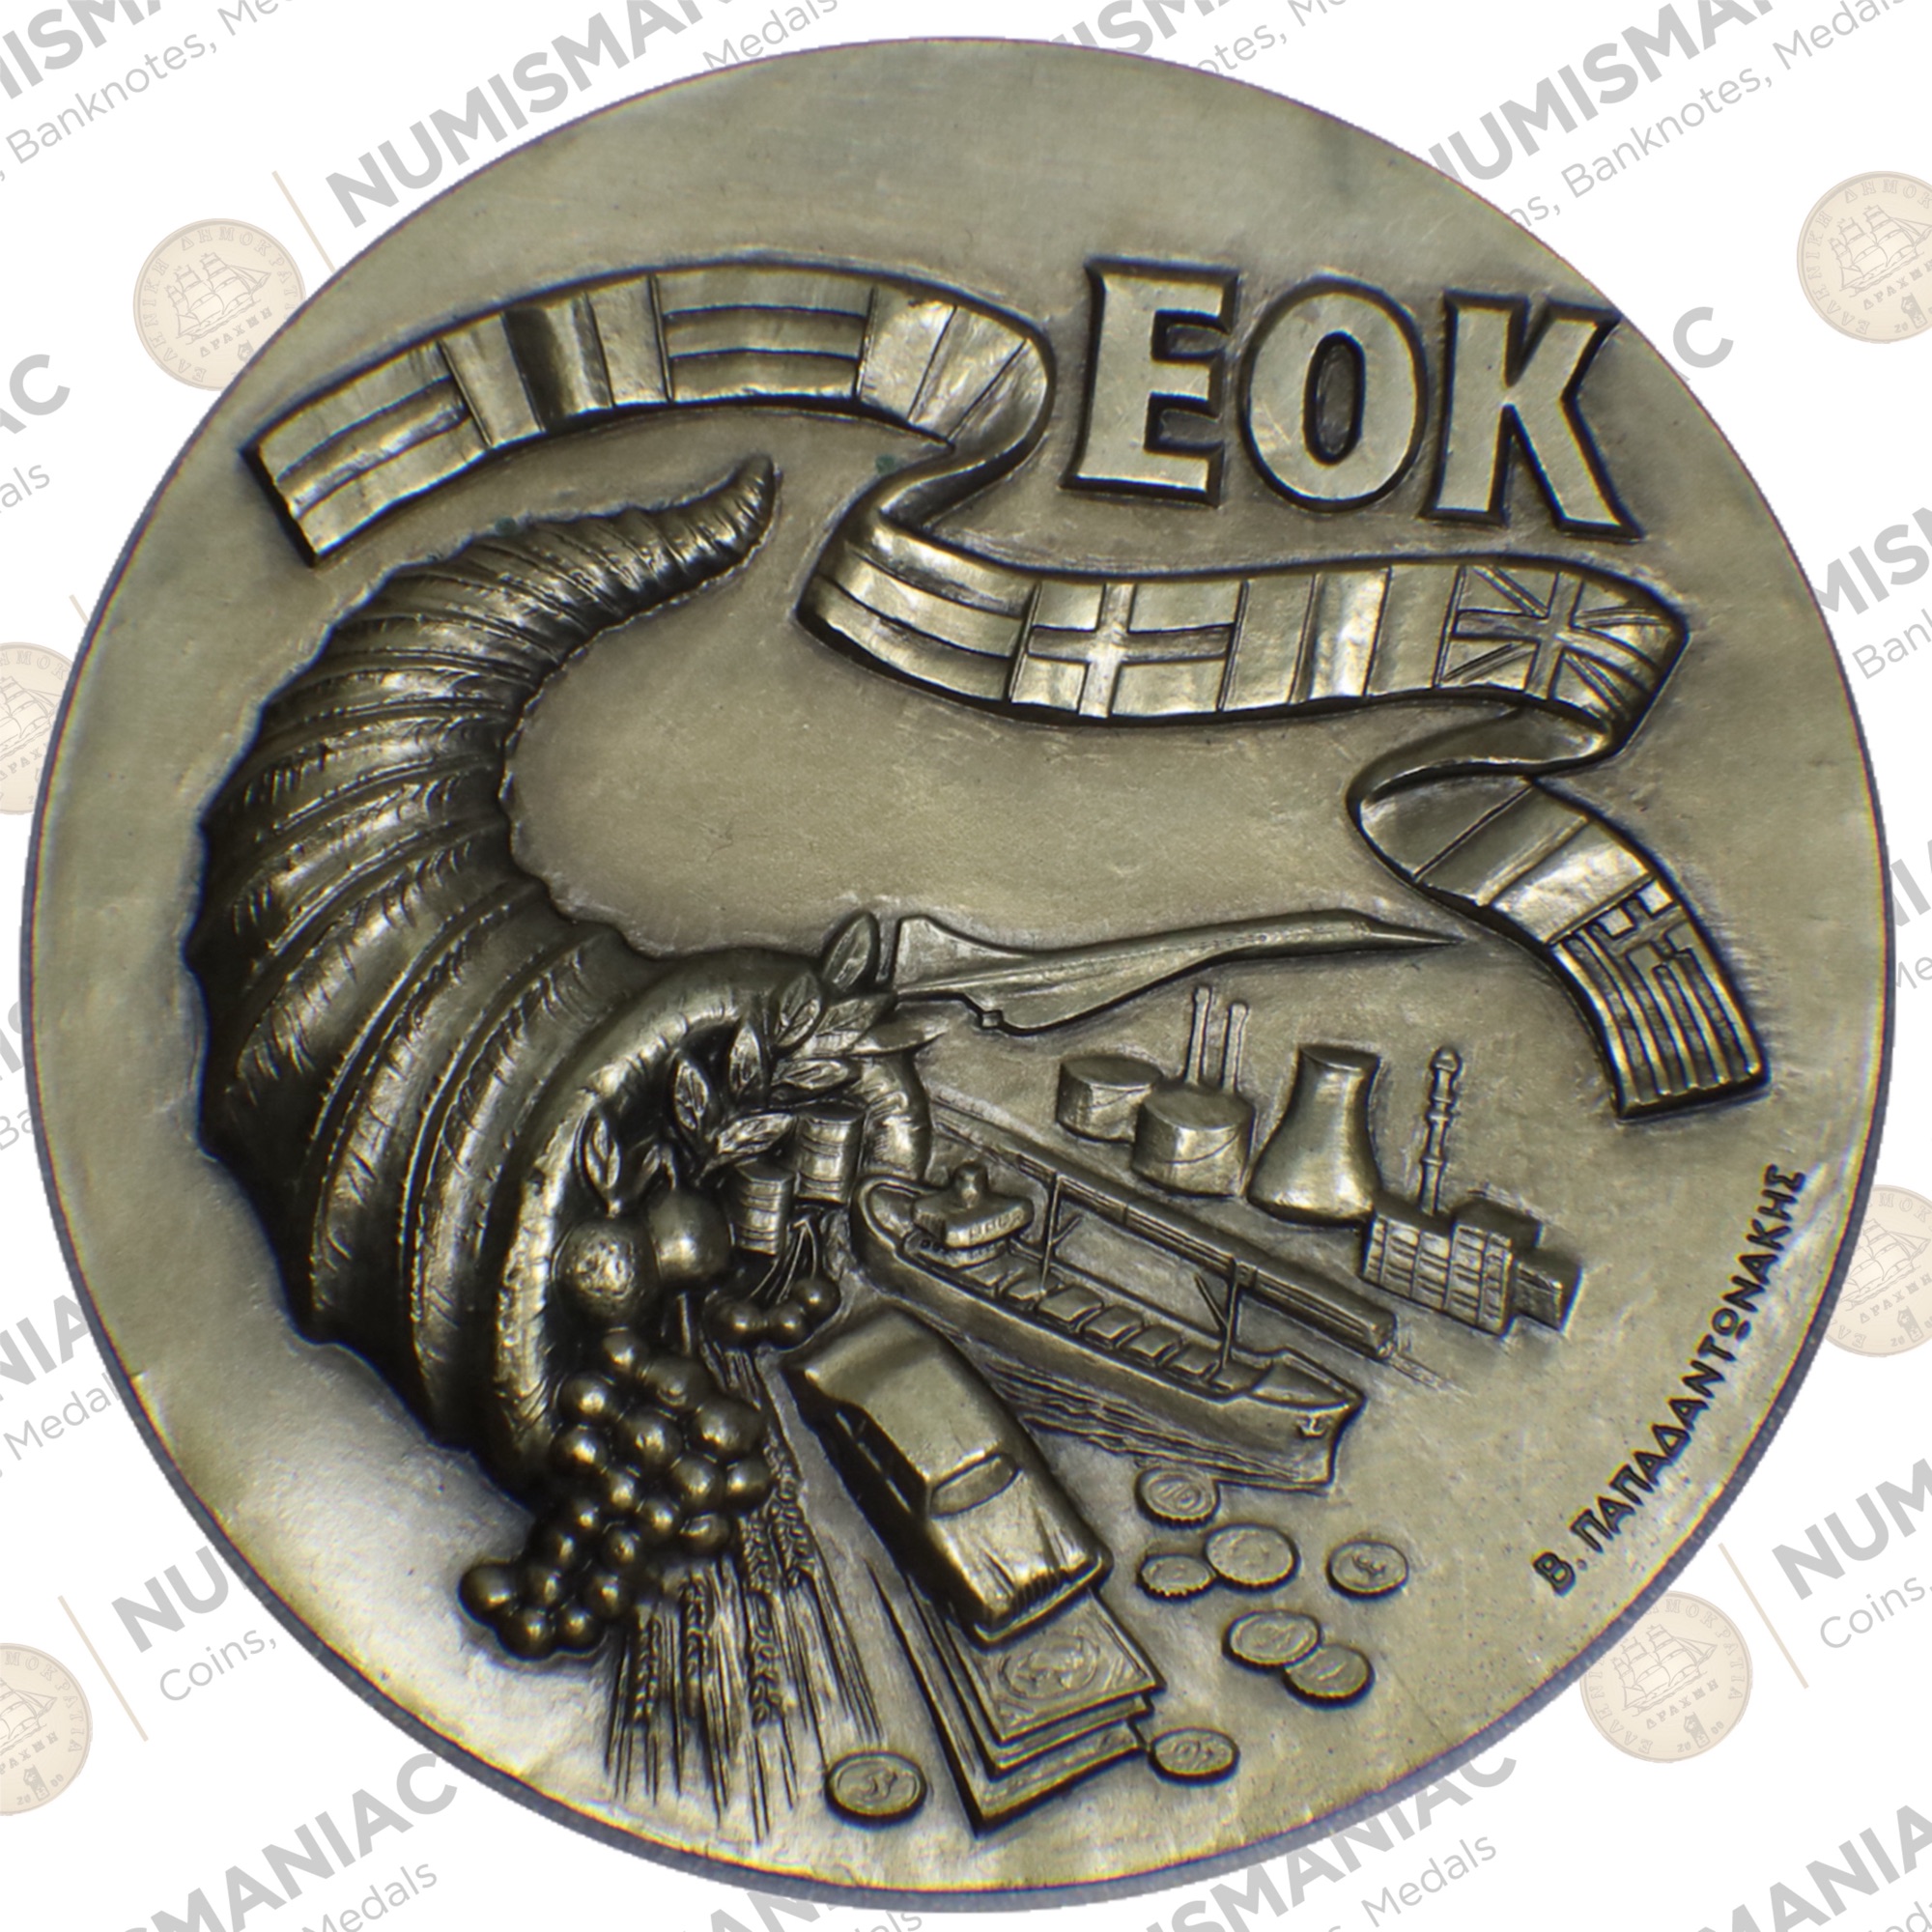 Greece 🇬🇷 Geniki Bank 1979 Silver Medal for Greece's Accession to the EEC. A